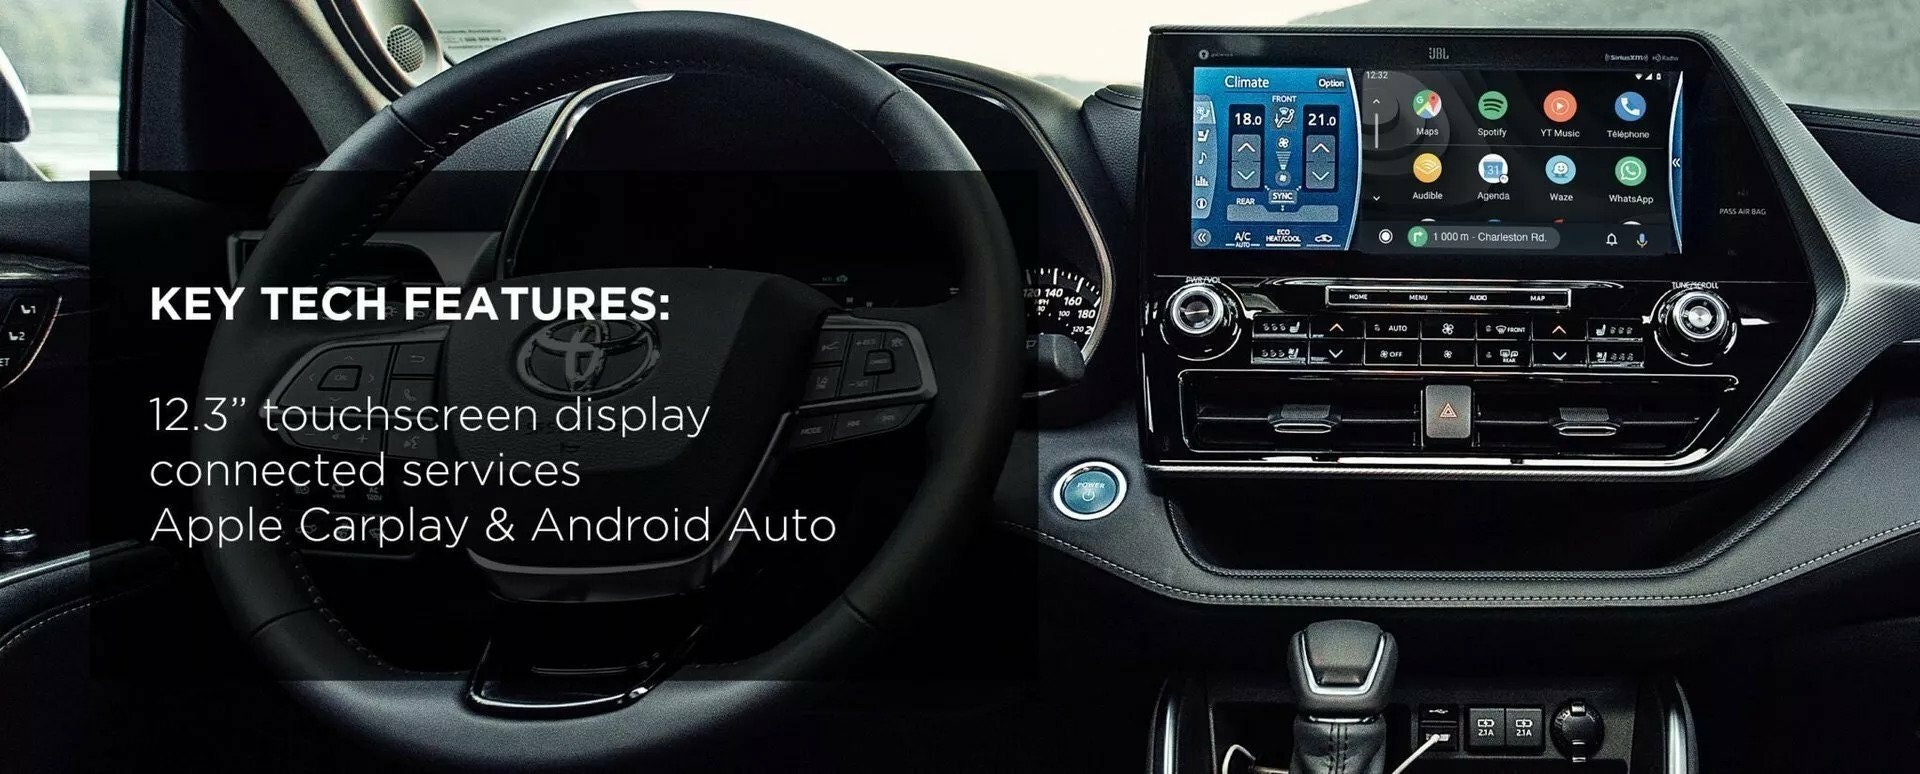 Key Tech Features of Highlander: 1" 12.3" touchscreen display 2) Apple CarPlay & Android Auto